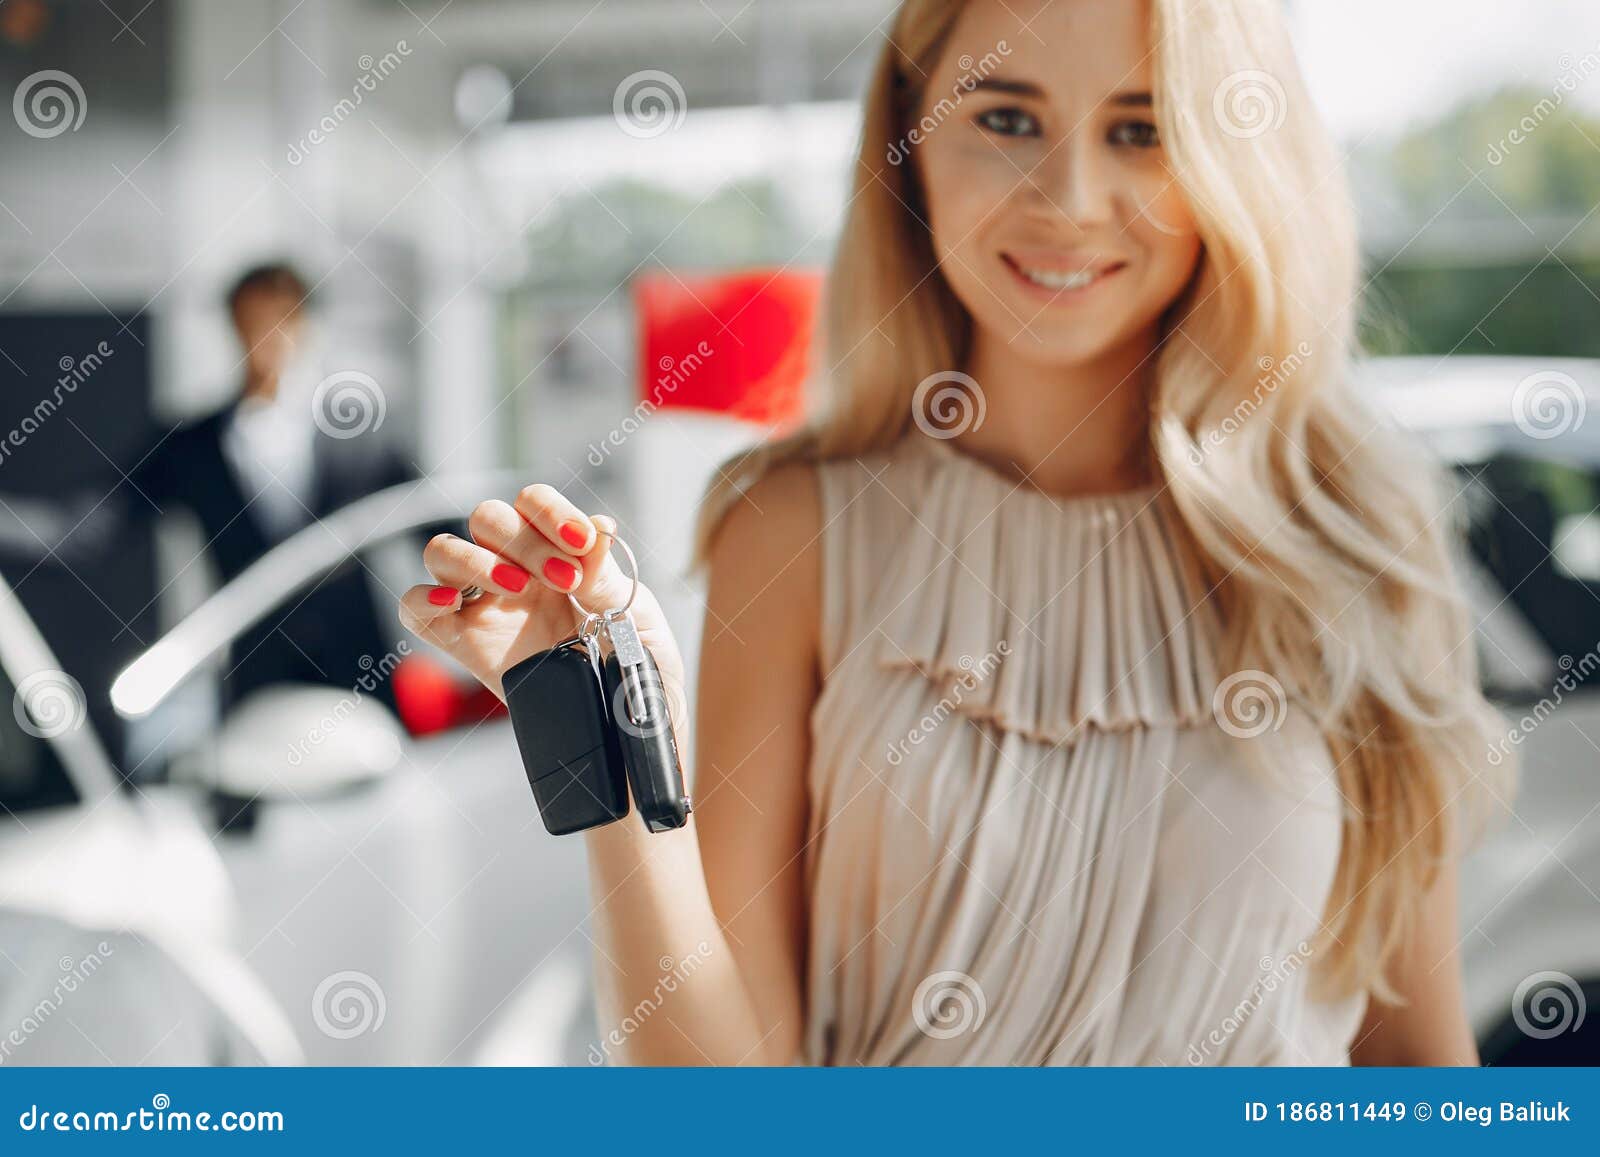 Stylish and Elegant Woman in a Car Salon Stock Image - Image of ...